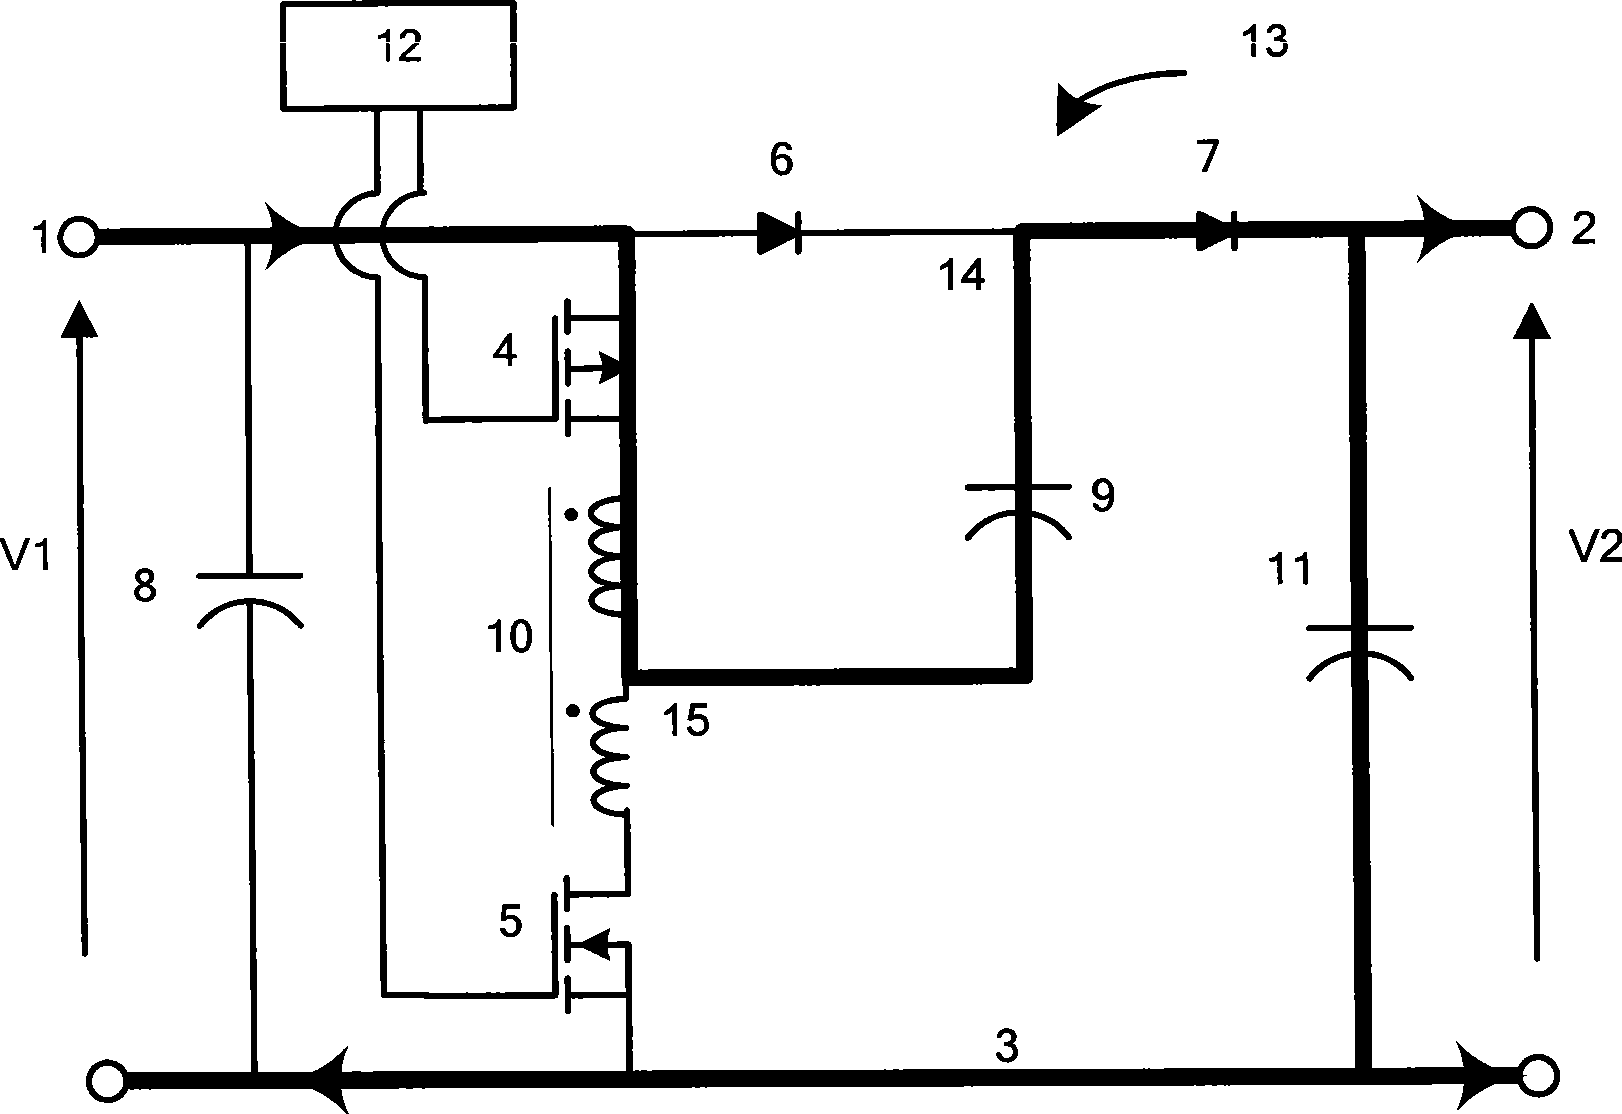 Resonant switched capacitor direct current voltage converter